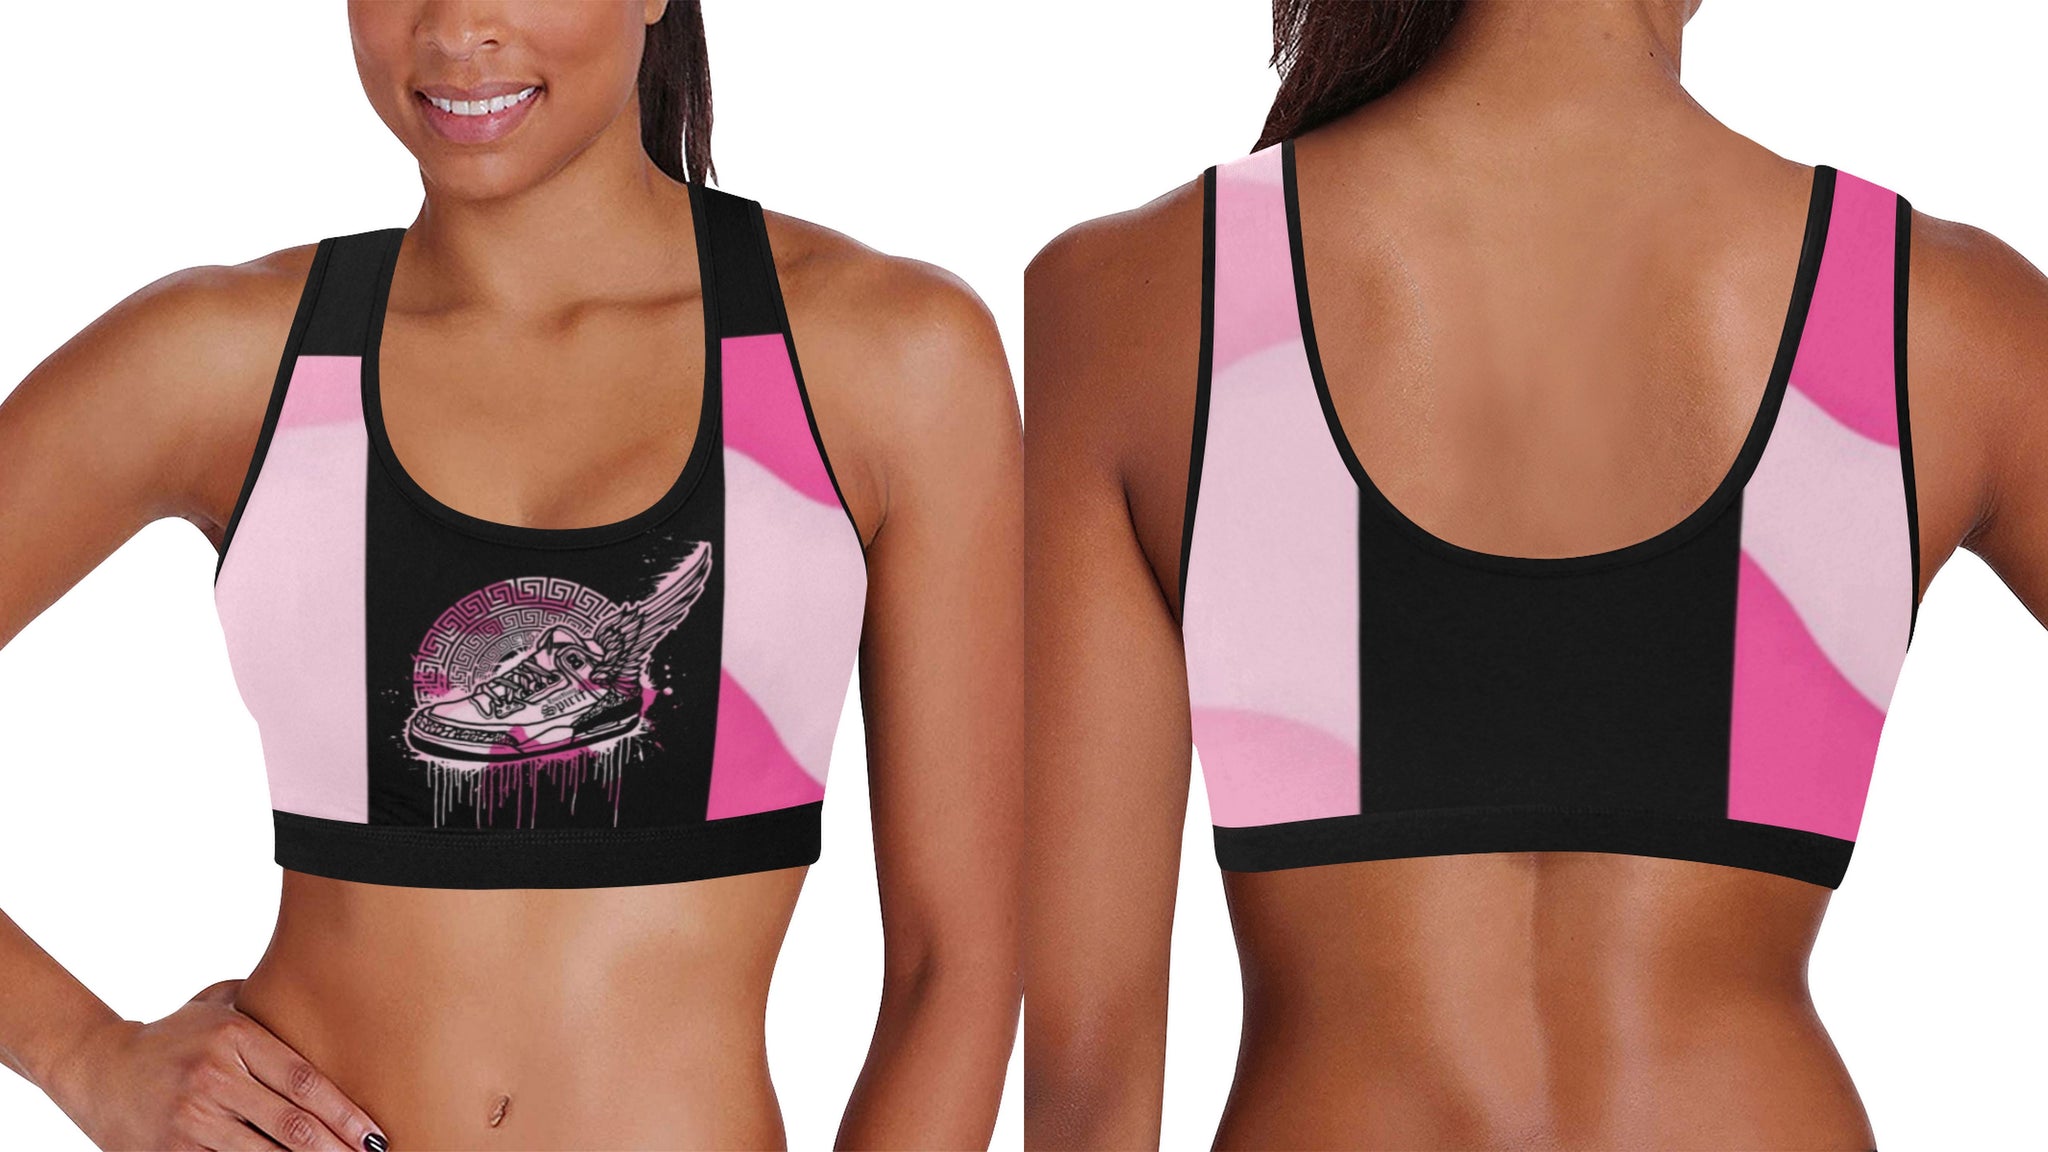 Footsteps Pink Cotton Candy Sports Bra